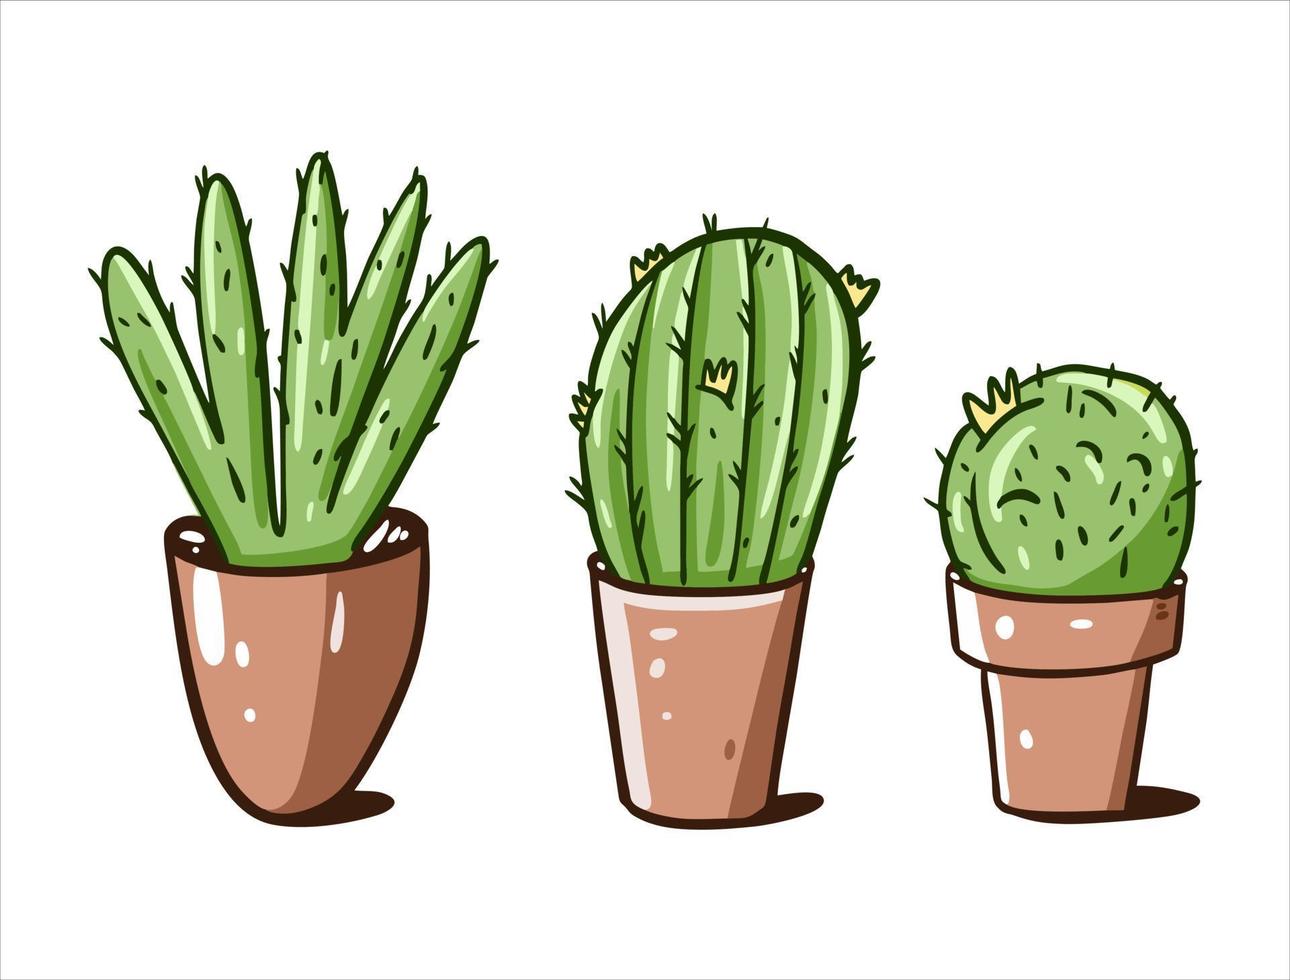 Green cactus in brown pots. Hand drawn vector illustration.